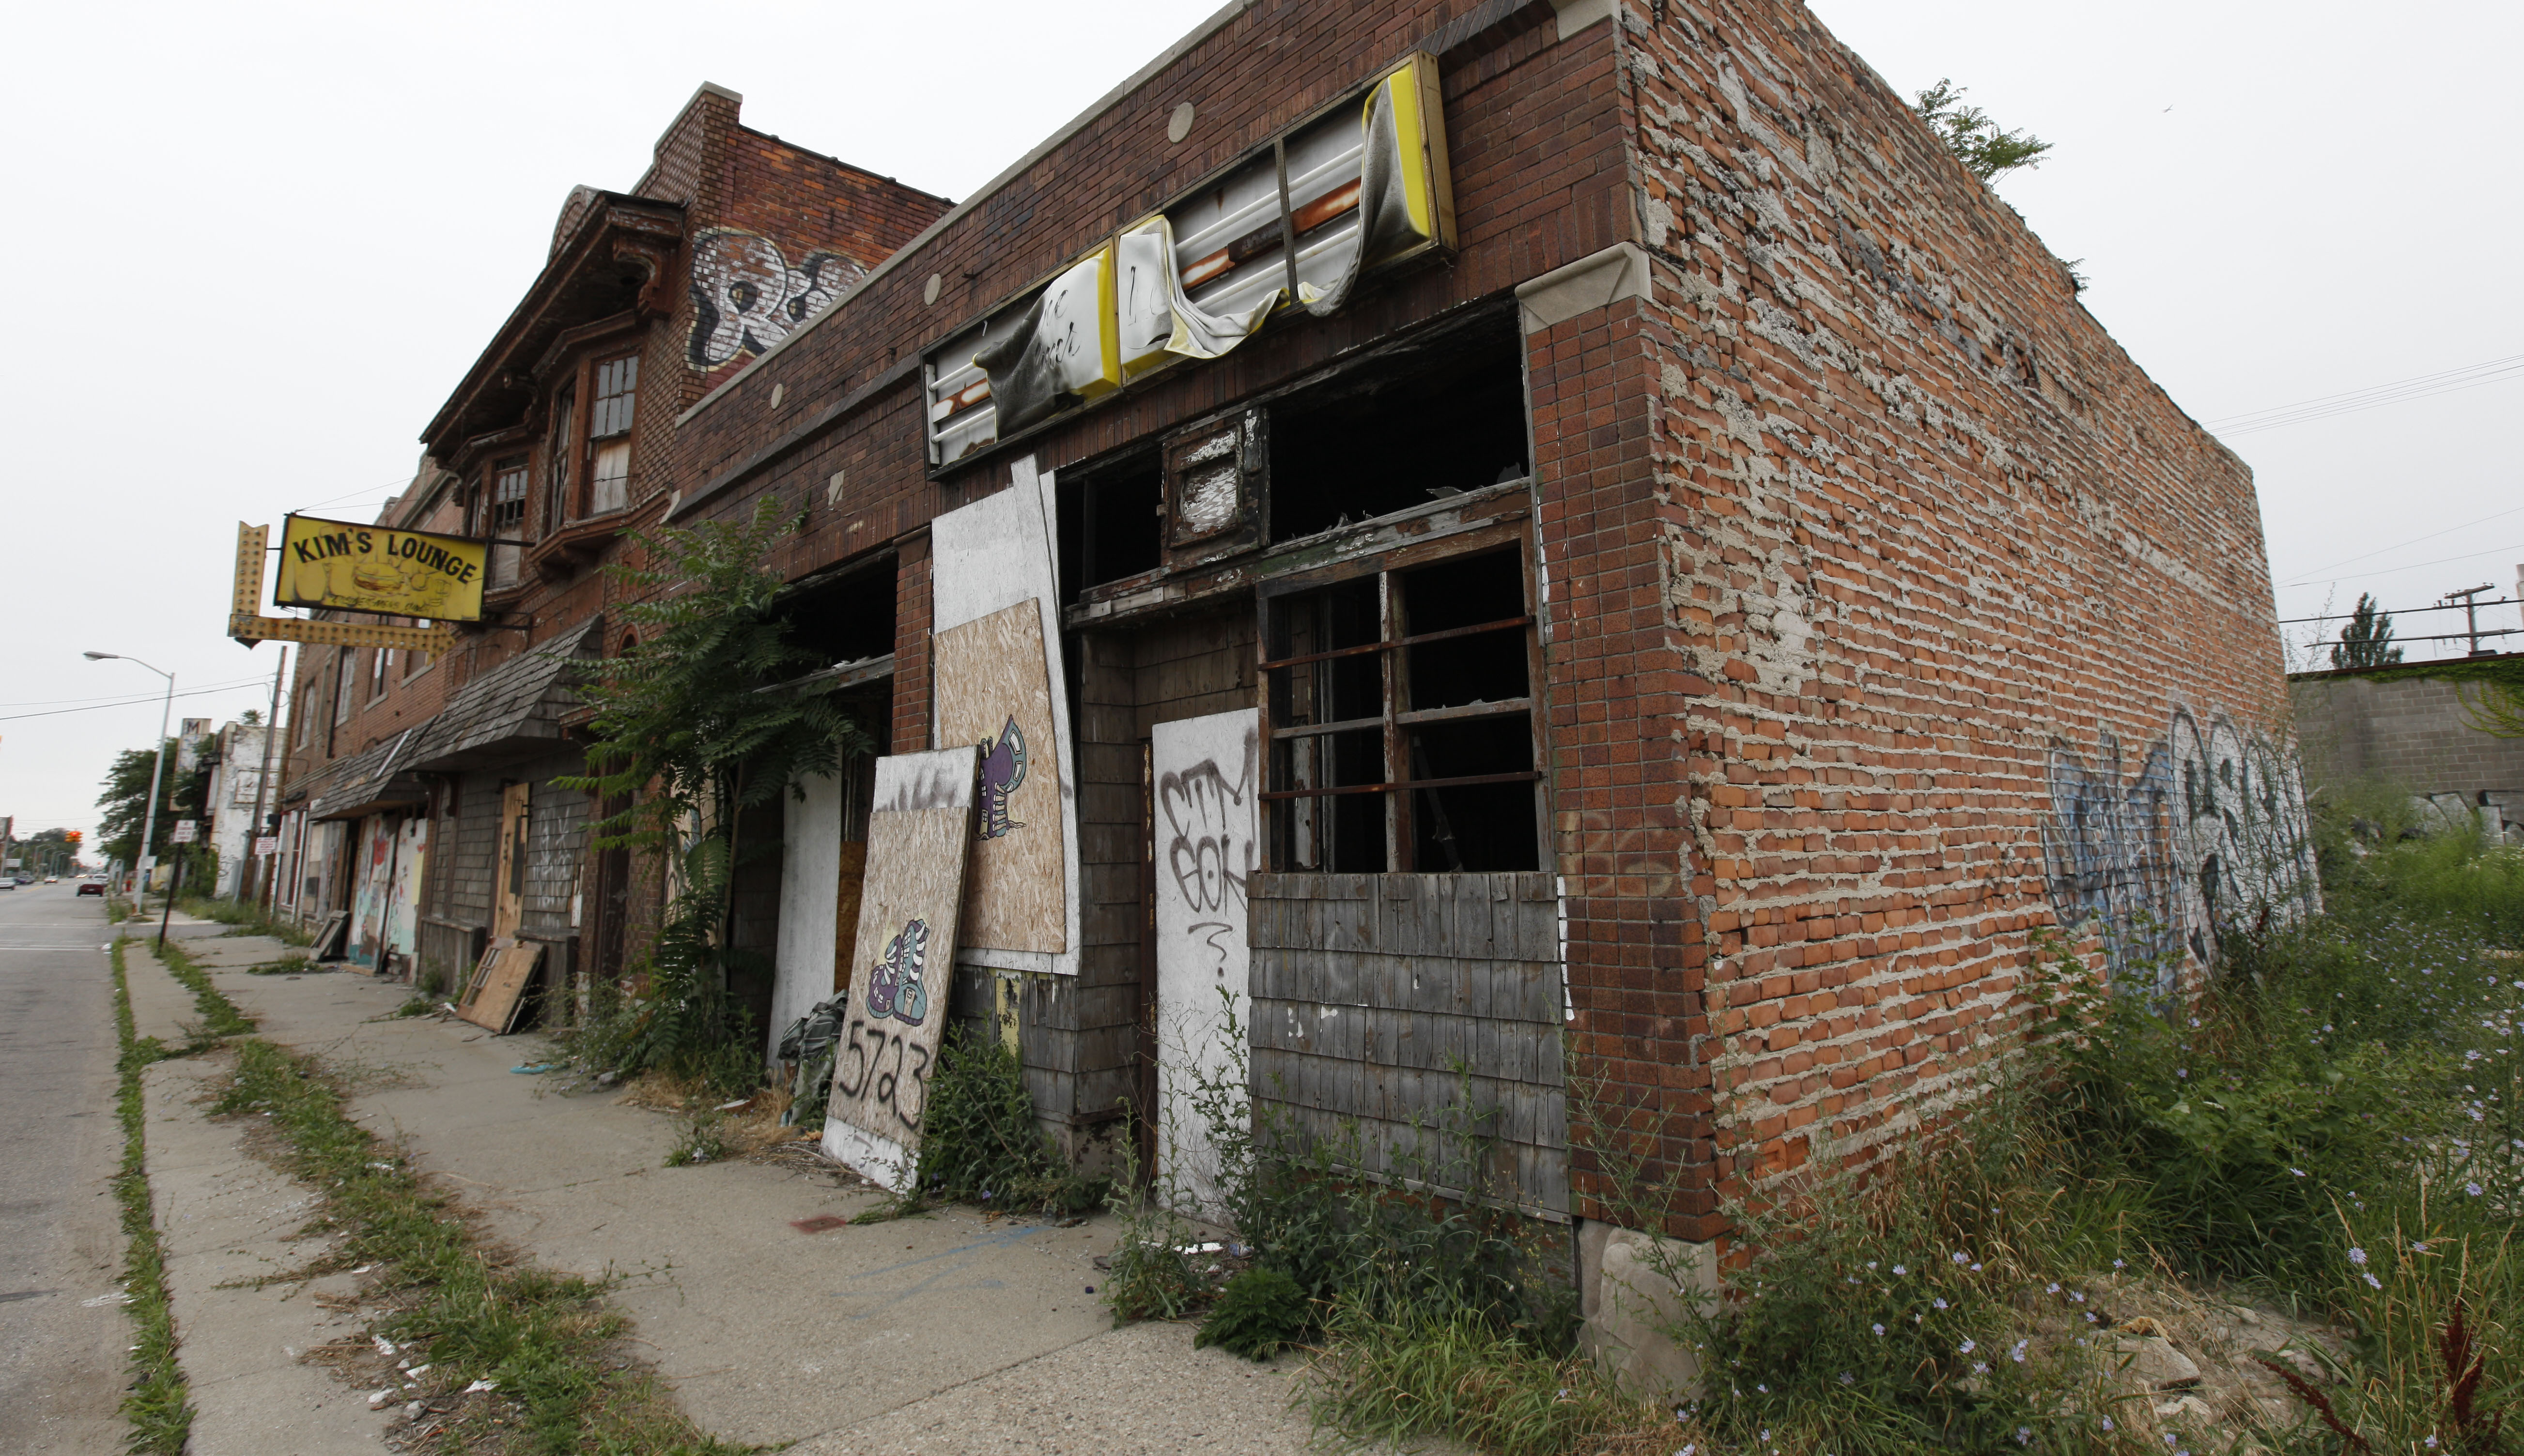 A section of vacant stores is shown in Detroit, Wednesday, July 27, 2011. Detroit’s mayor unveiled a plan that could determine what the city looks like as it fights for vitality, announcing that neighborhoods will receive different kinds of services depending on the condition of homes, how many people live there and the level of blight. His plan isn’t really about shrinking Detroit _ the 139-square-mile city’s boundaries aren’t receding. He instead wants to encourage redistribution of what’s left of Detroit’s population into areas where people still live, where houses aren’t about to cave in and where the city’s scant resources won’t be spread dangerously thin. (AP Photo/Paul Sancya)